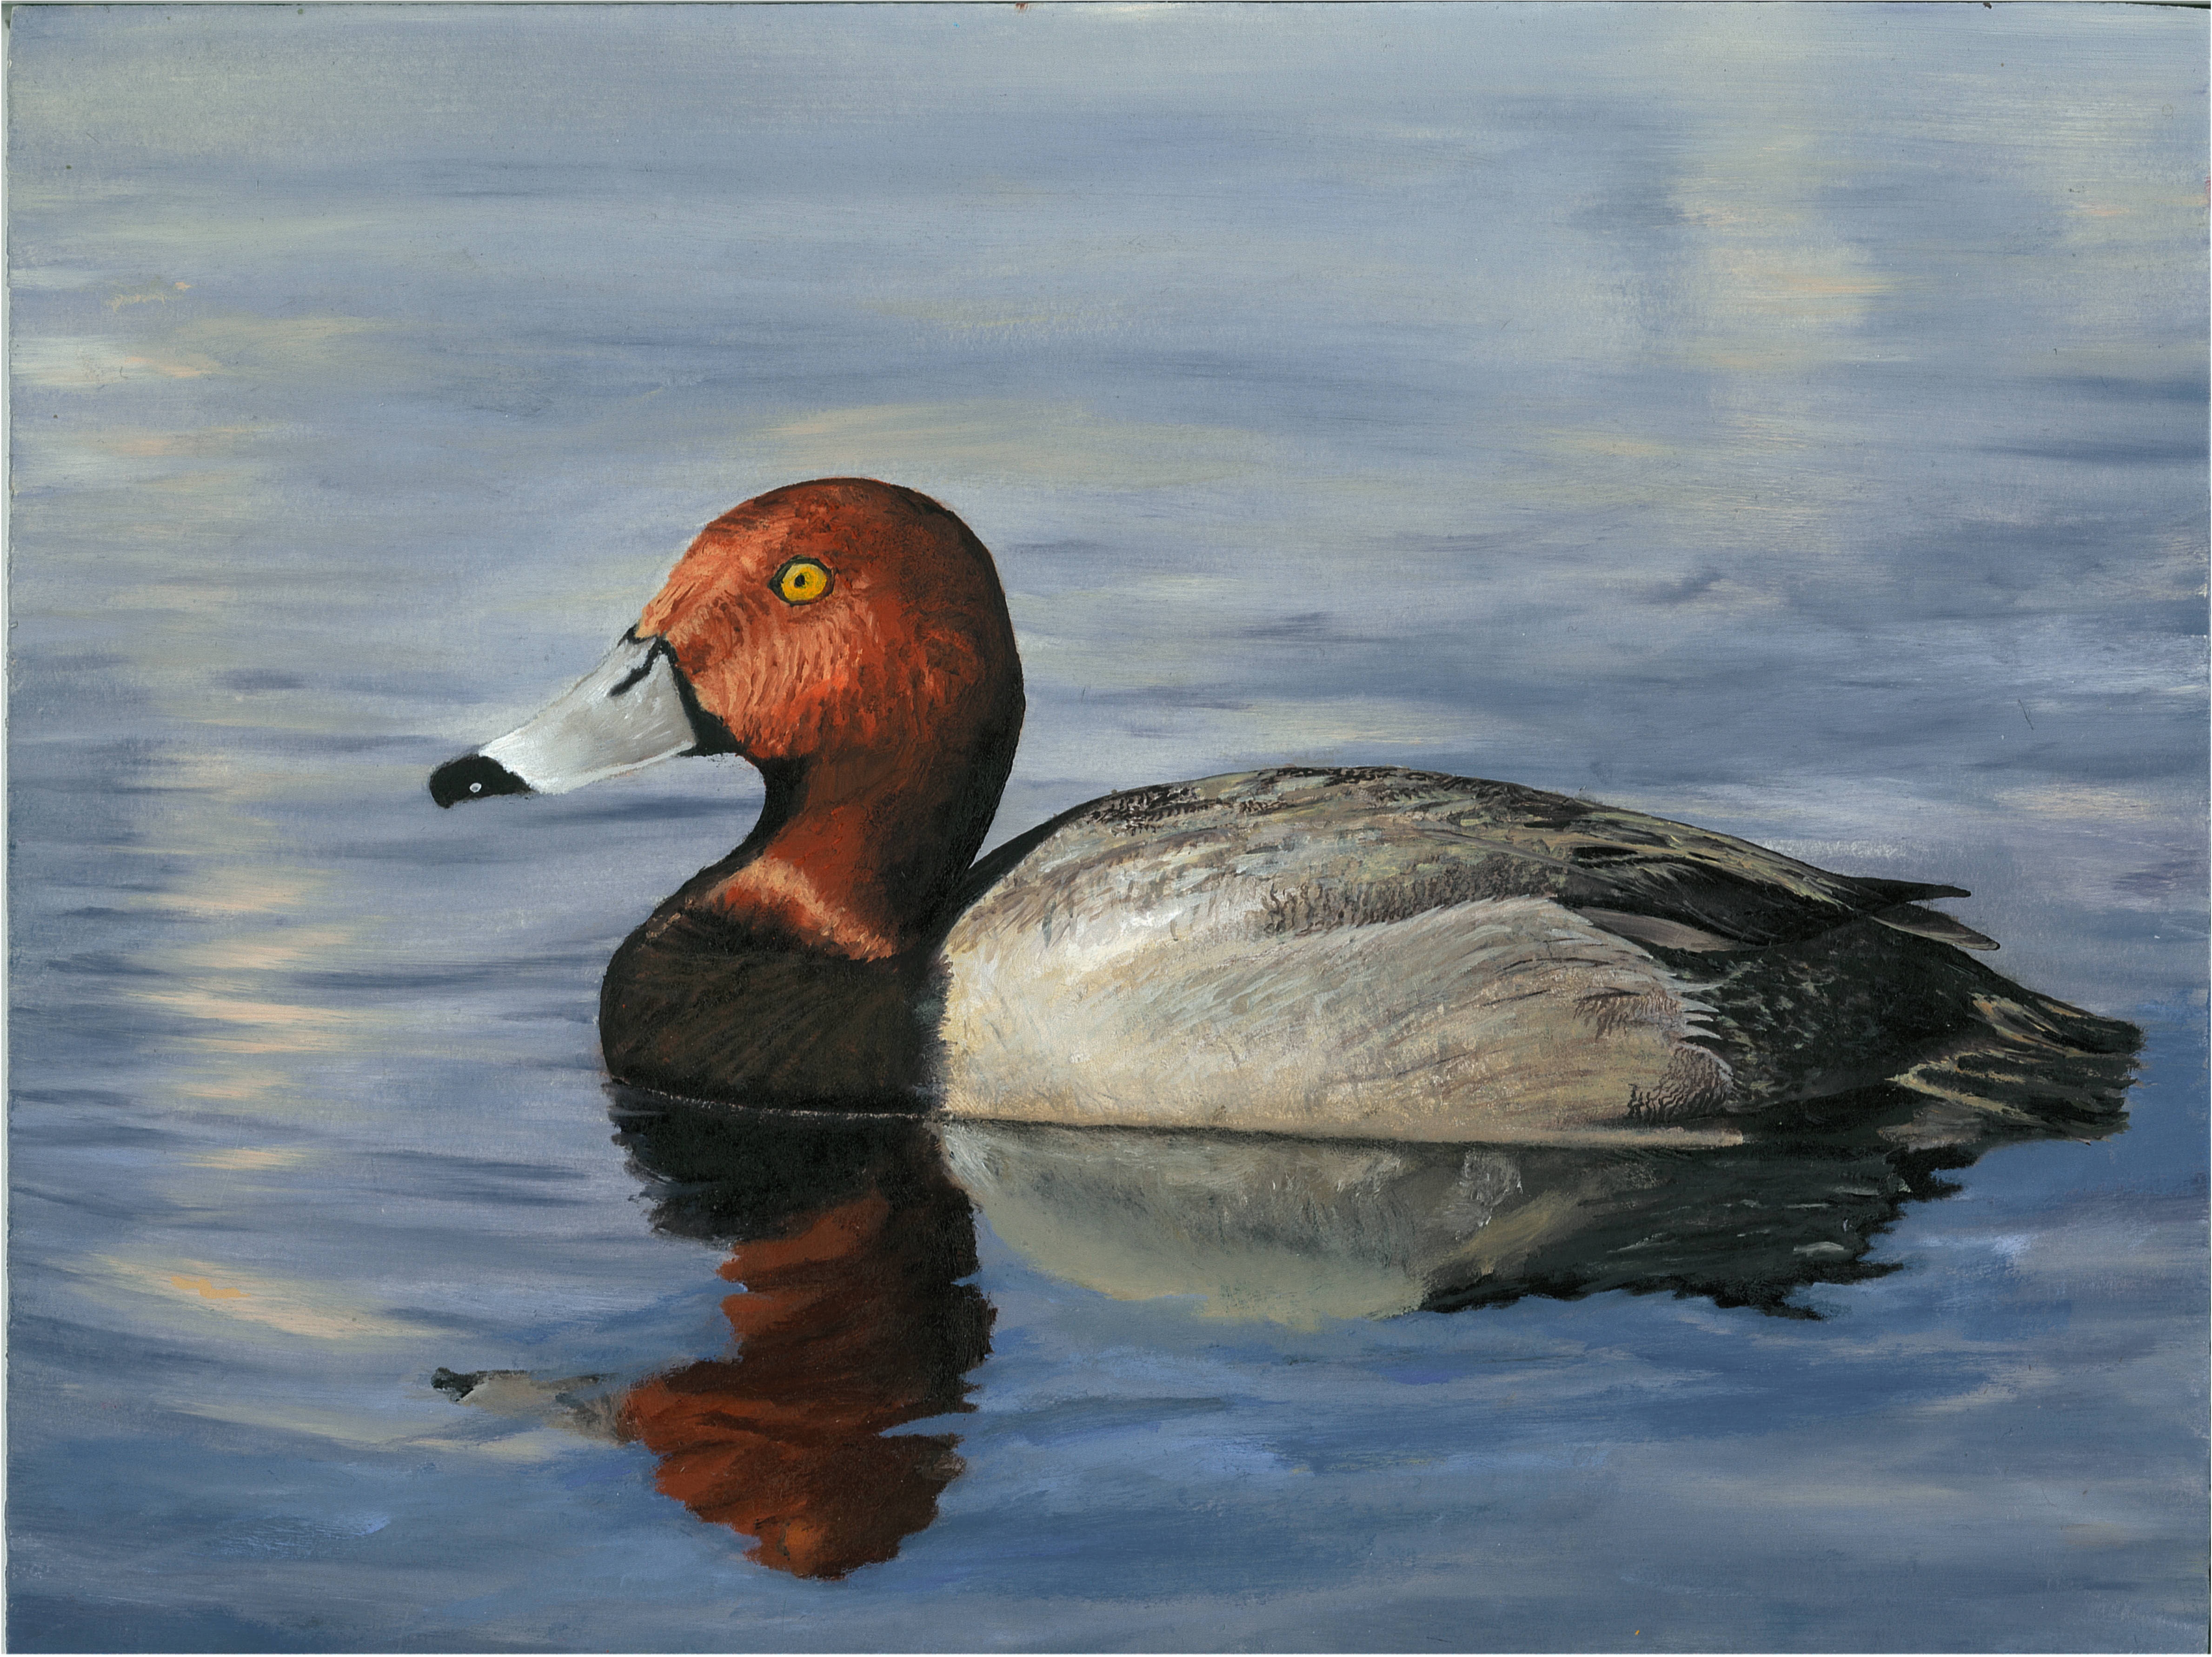 The finalist from North Dakota for the 2011 Junior Duck Stamp Art Contest. (5597876829)